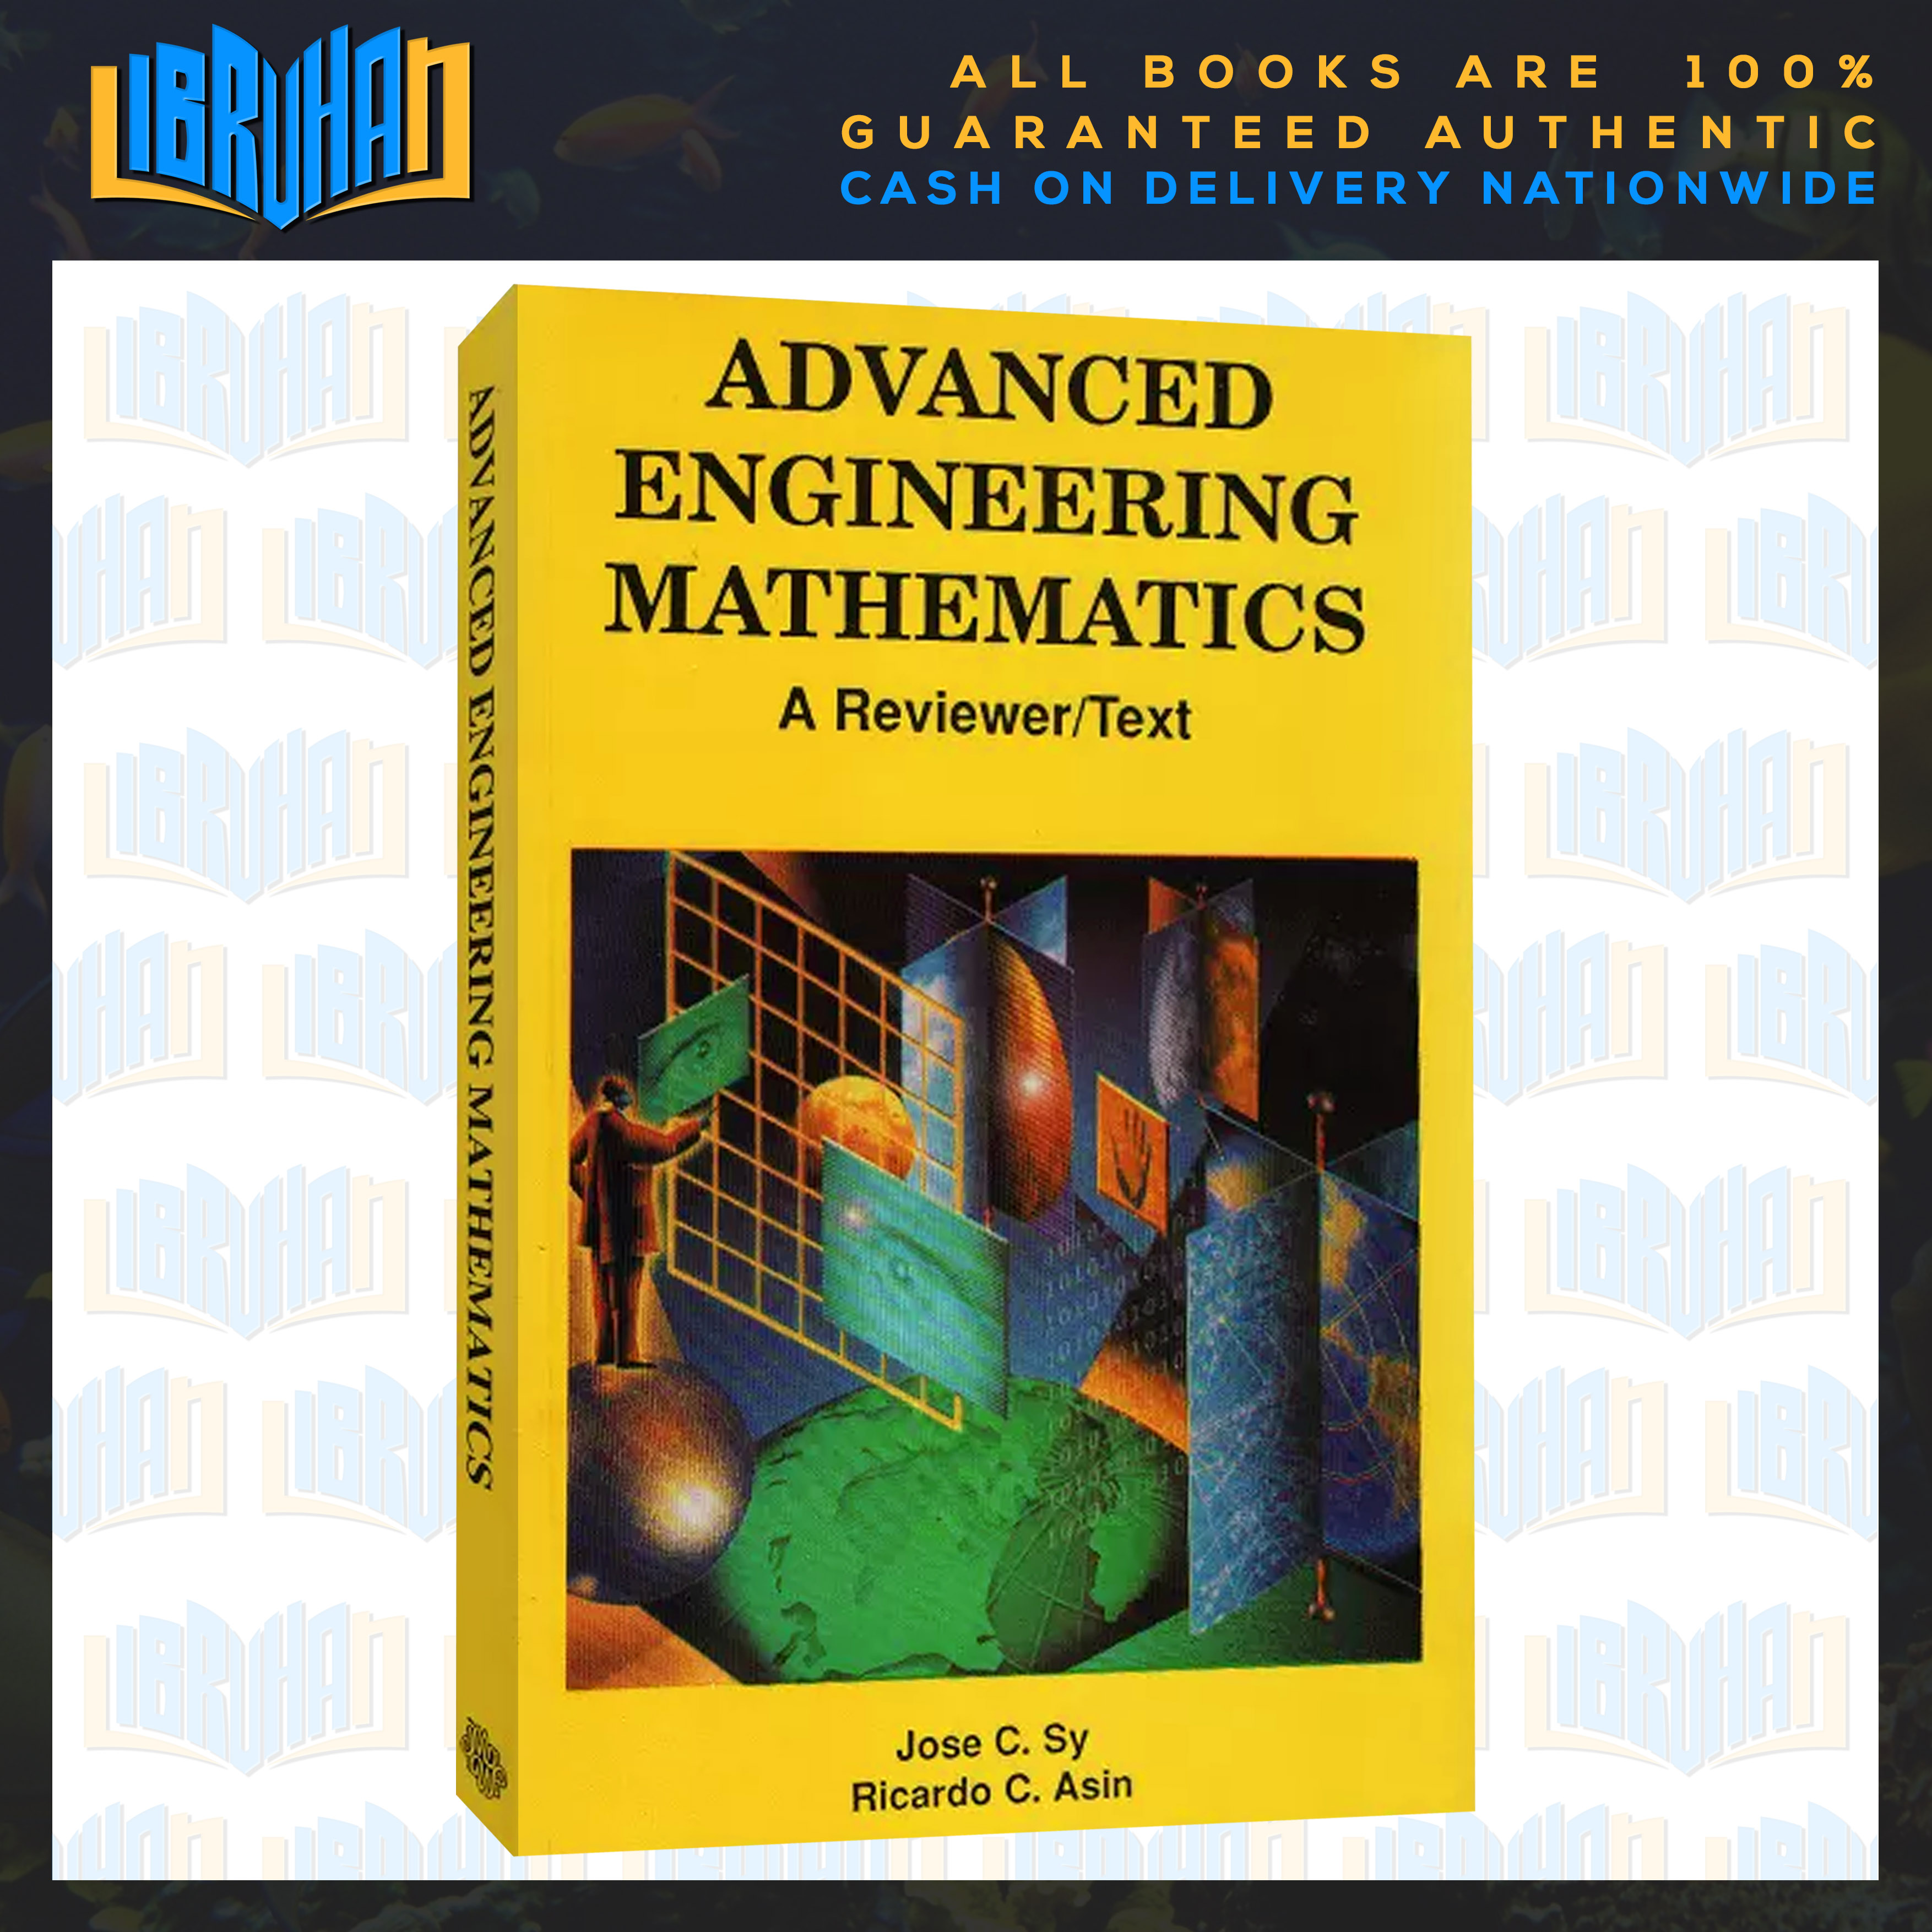 ADVANCED ENGINEERING MATHEMATICS A Reviewer/Text - Jose C. Sy